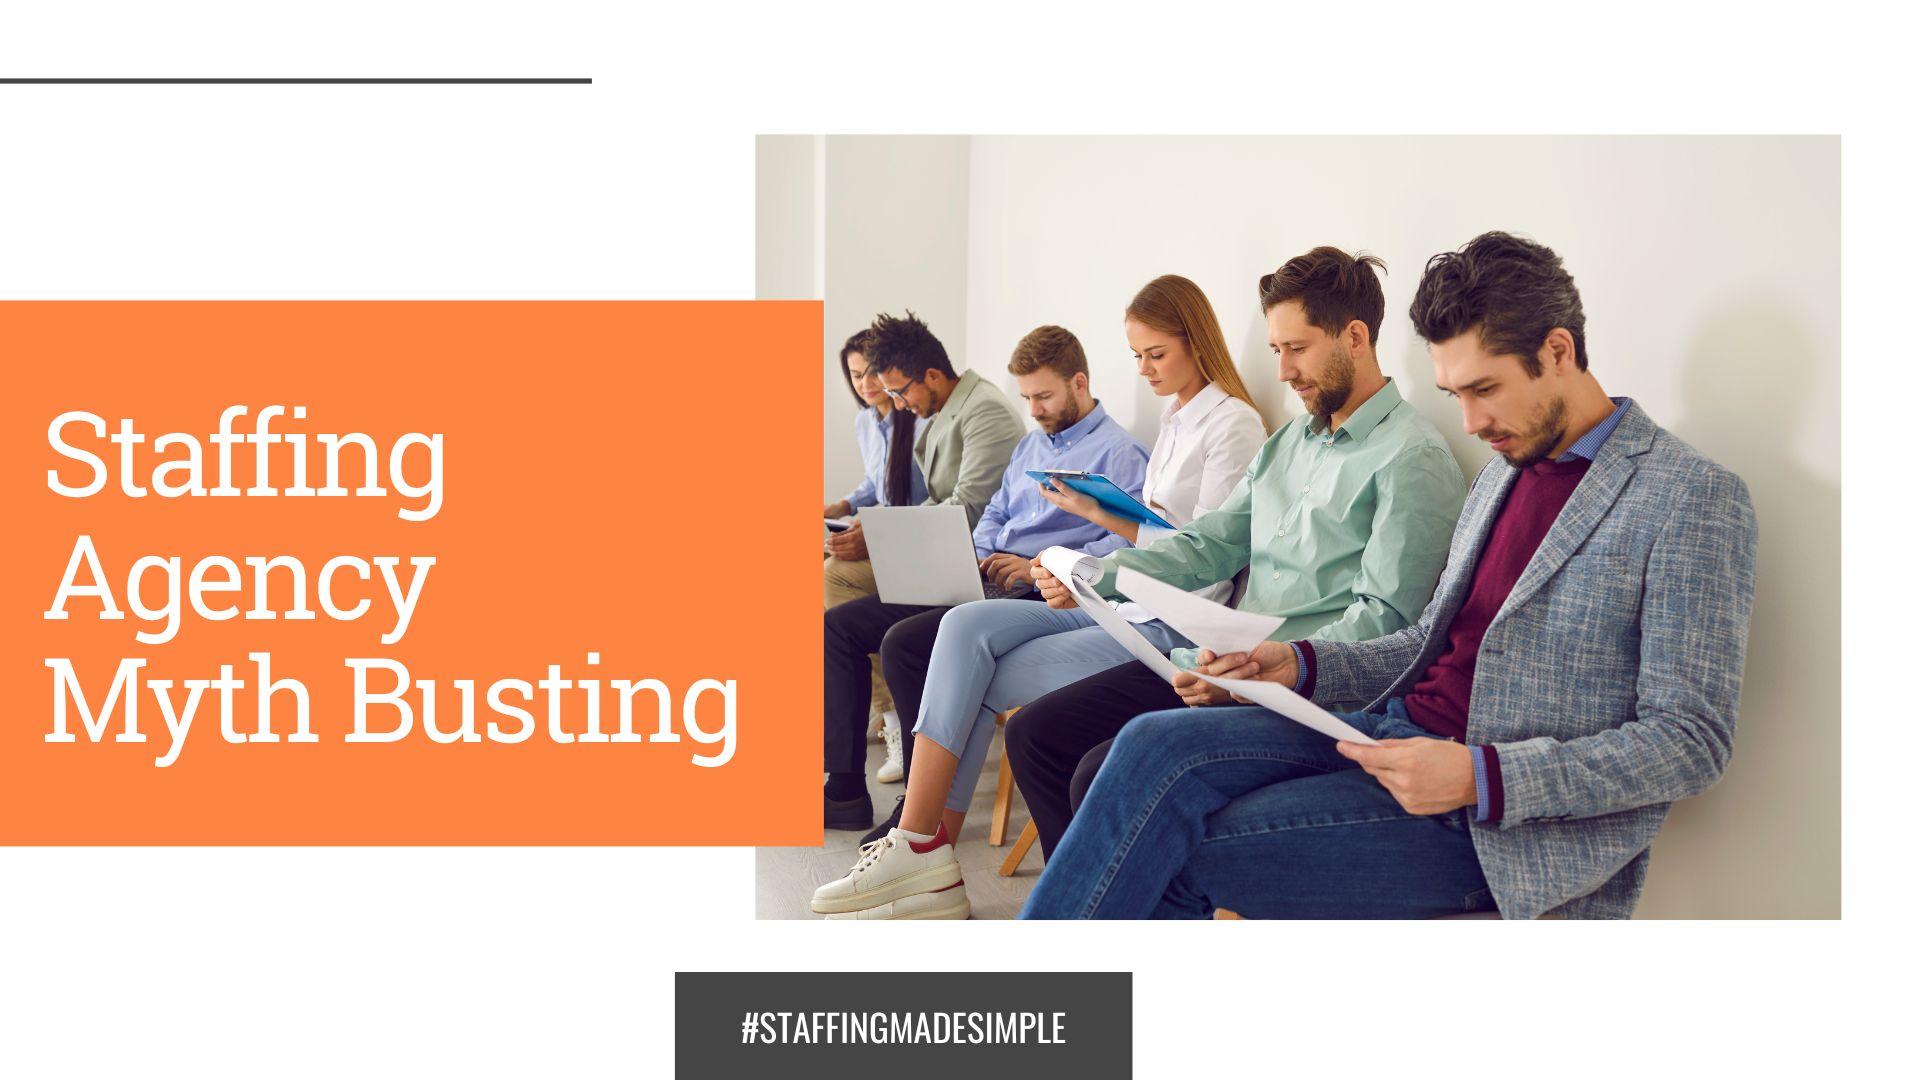 Staffing Agency Myth Busting - PeopleFirst Staffing